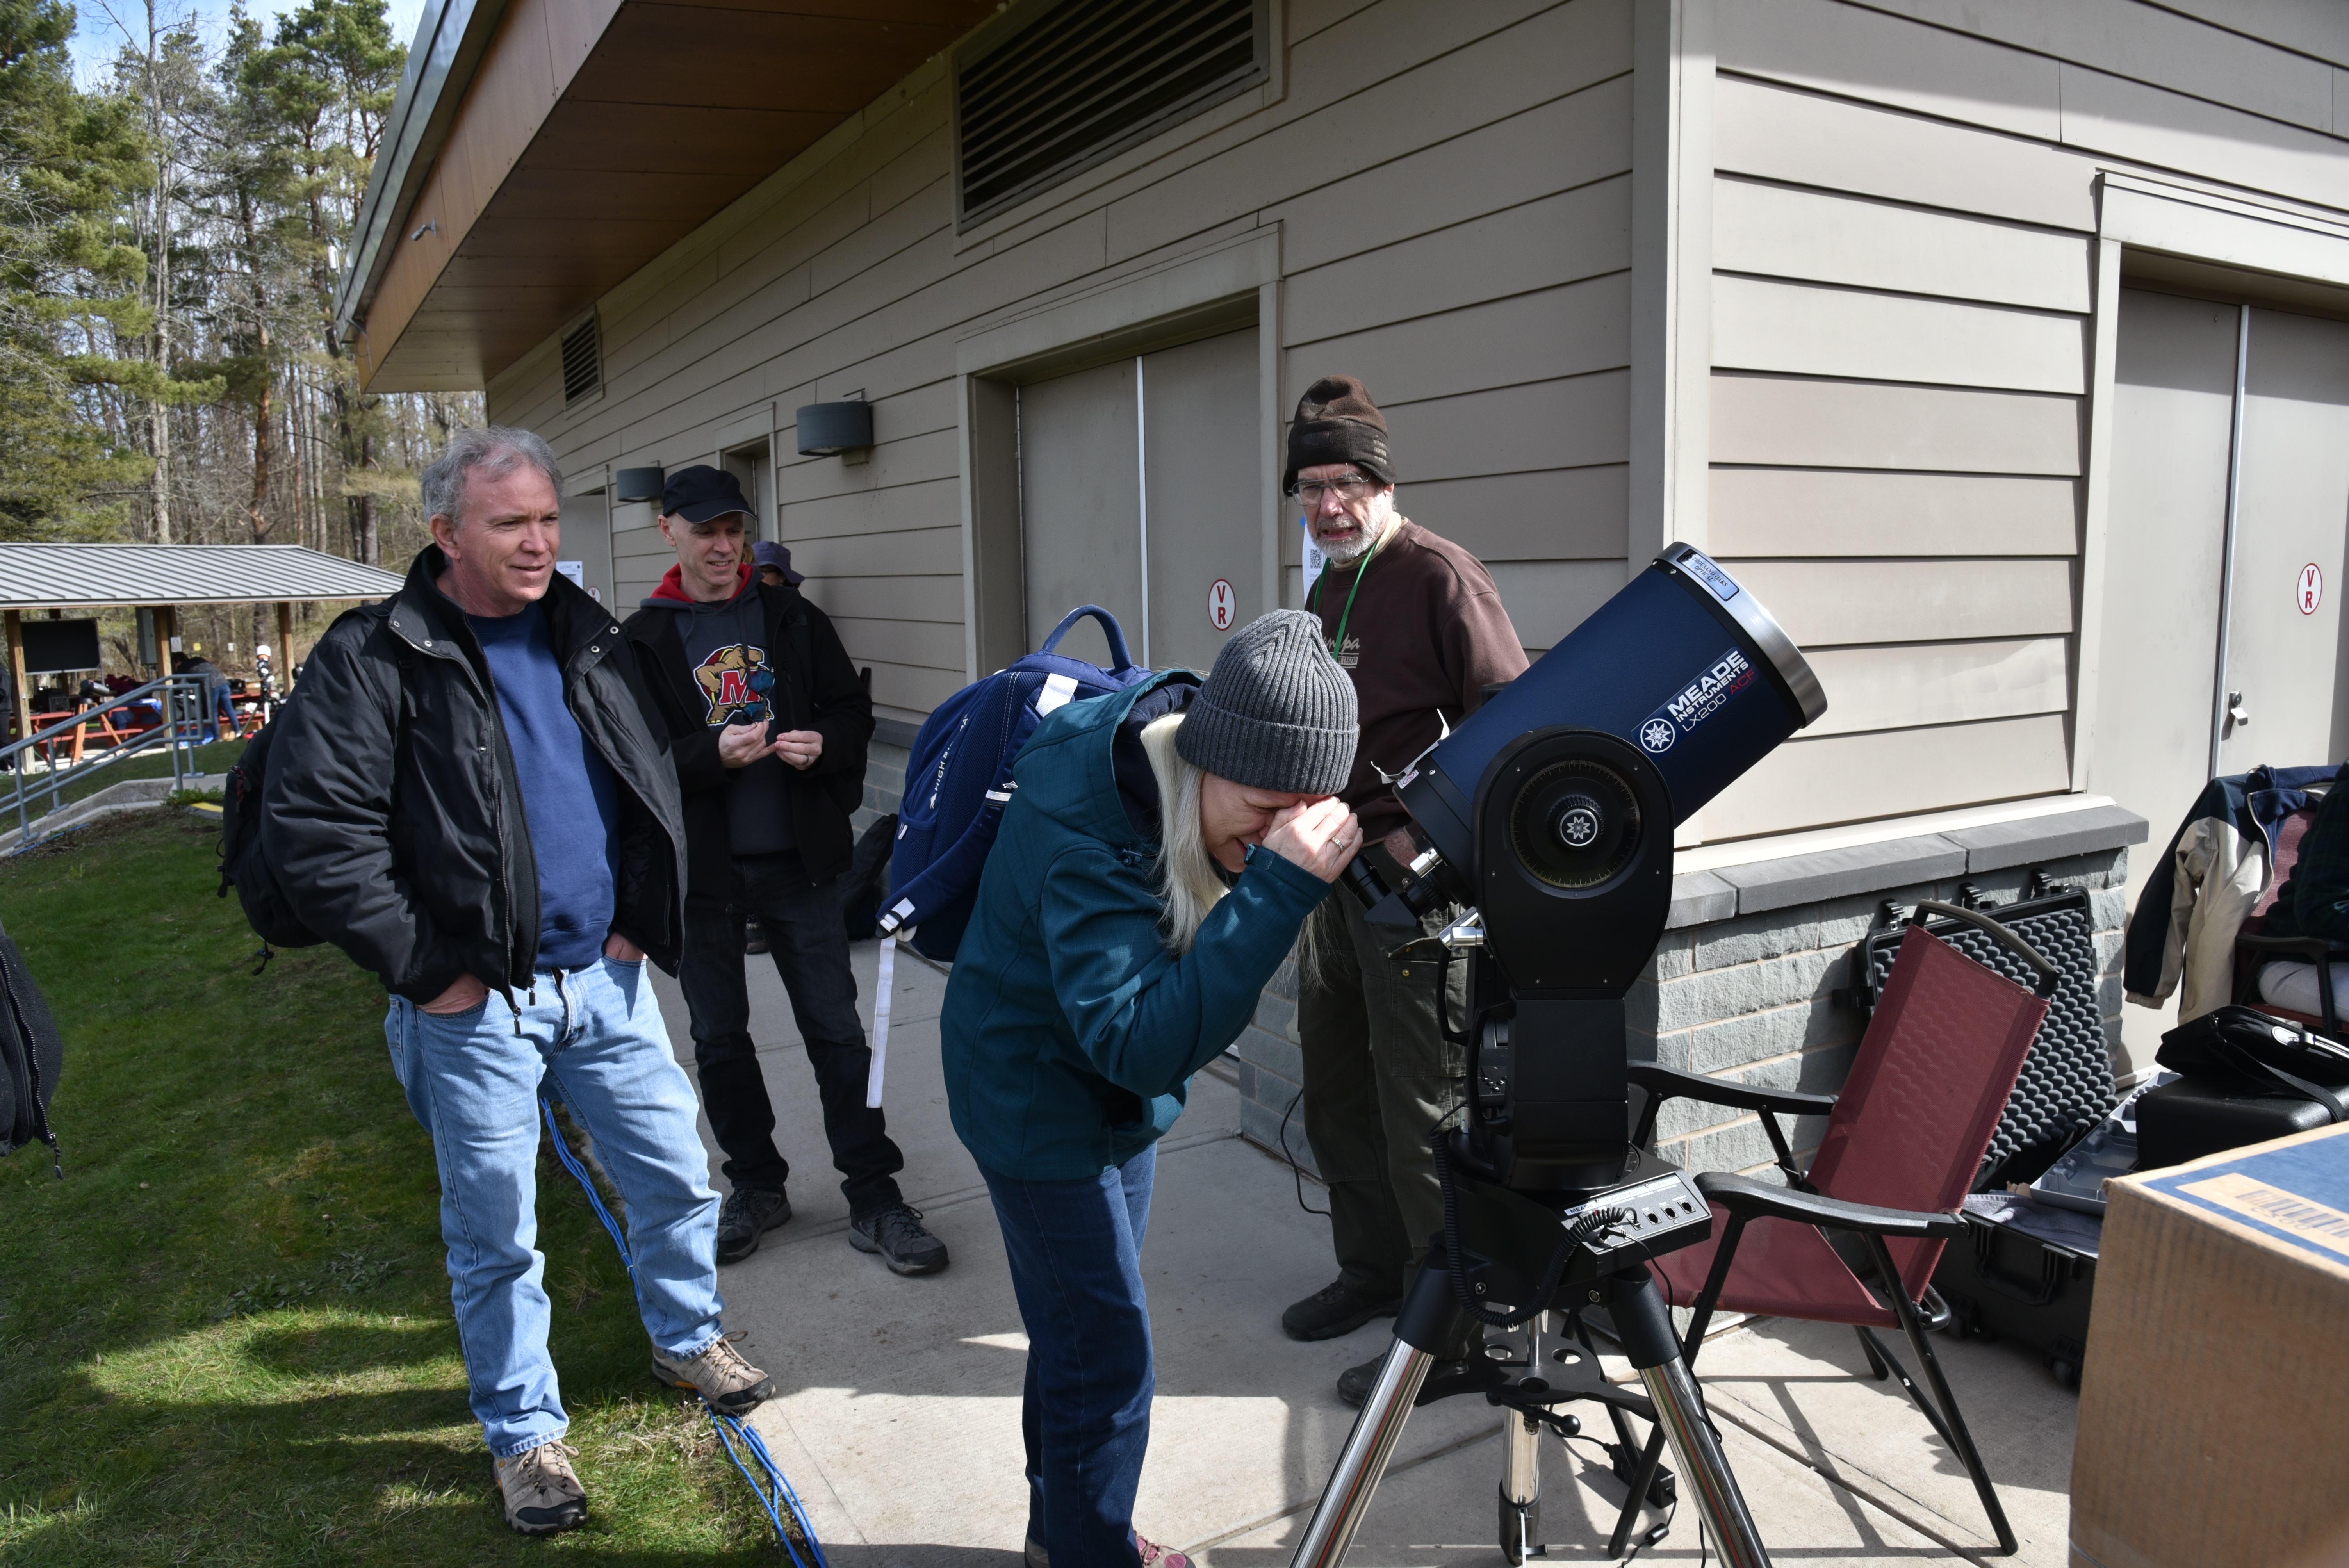 Telescopes with video were set up at Rice Creek Field Station by groups such as the Syracuse Astronomical Society, Kopernik Observation Science Center, Pompey Observatory and others.